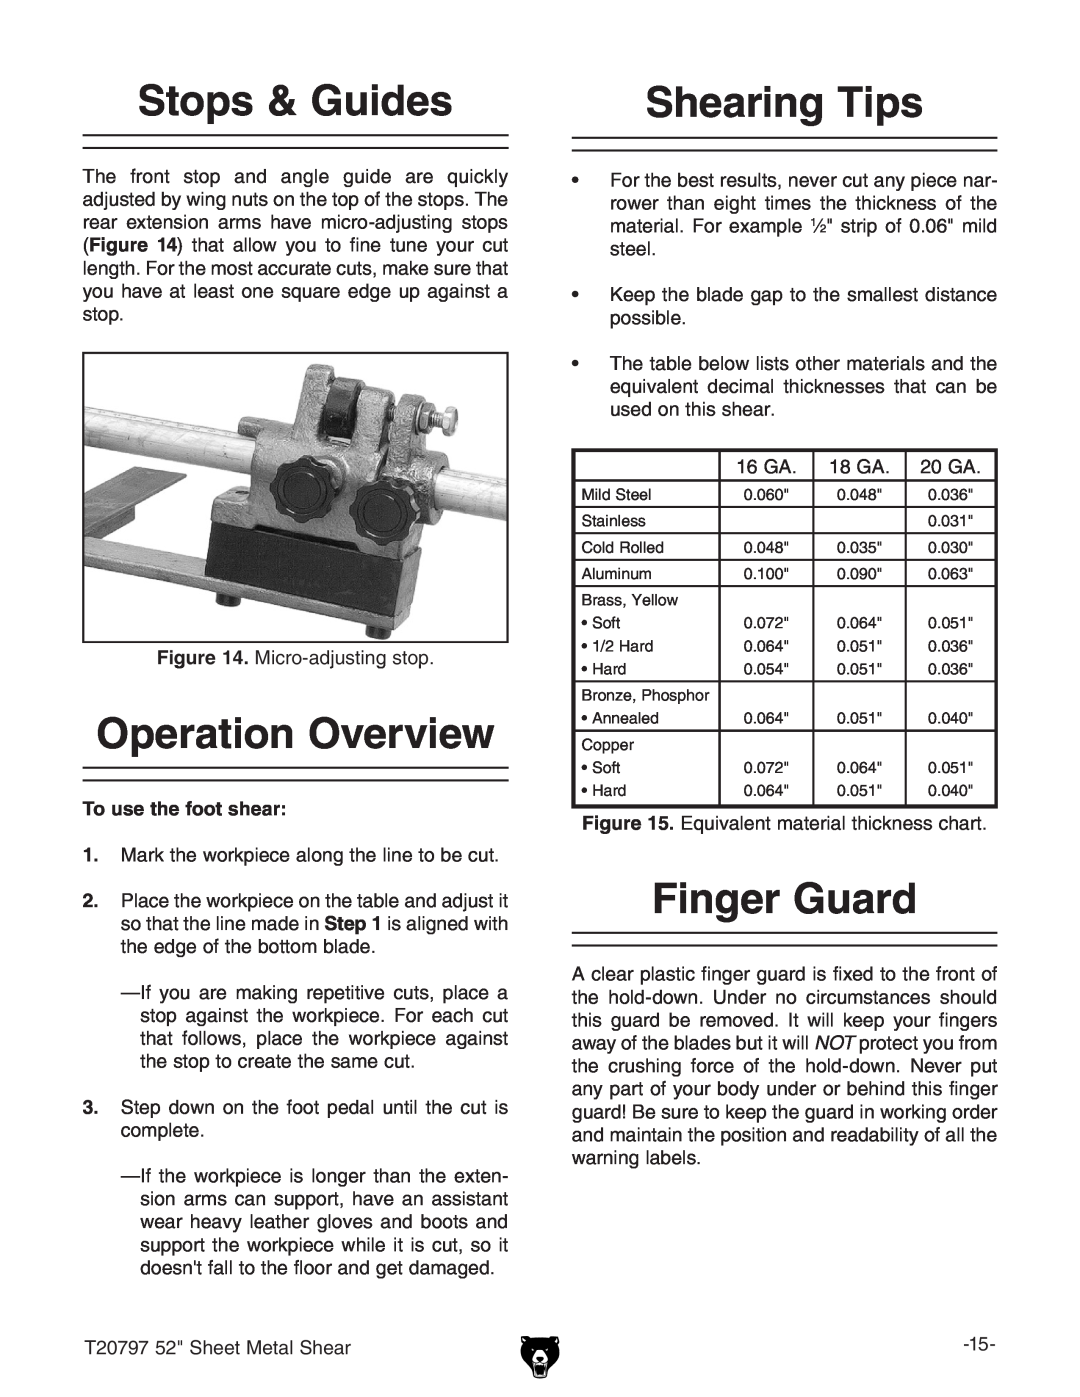 Grizzly T20797 Stops & Guides, Operation Overview, Shearing Tips, Finger Guard, BXgdVYjhic\hide#, To use the foot shear 